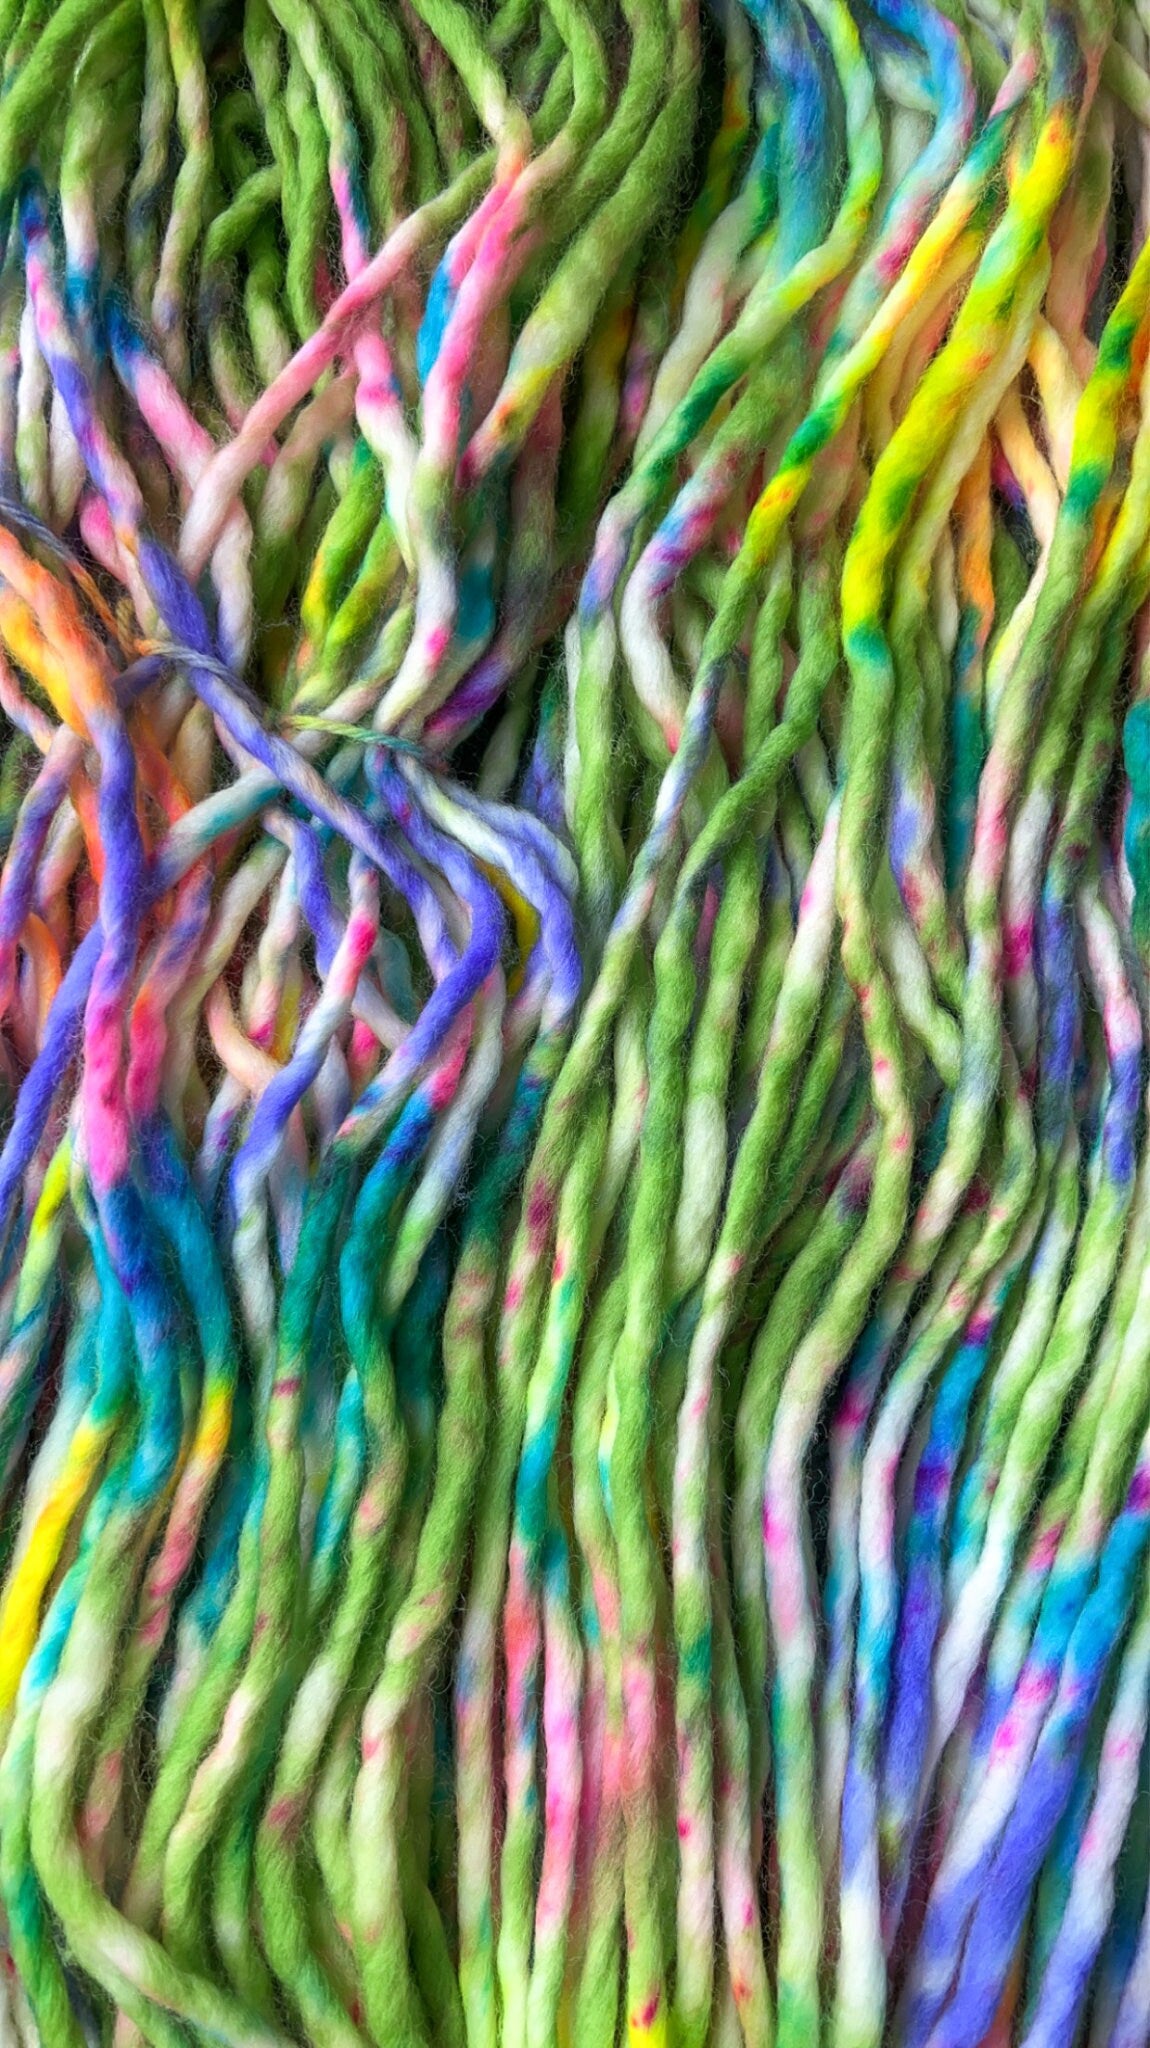 Hand-Dyed Merino Wool Yarn - Soft and Durable Yarn for Knitting and Crocheting | Indie Dyed Merino Wool | Super Bulky | Wild Thing